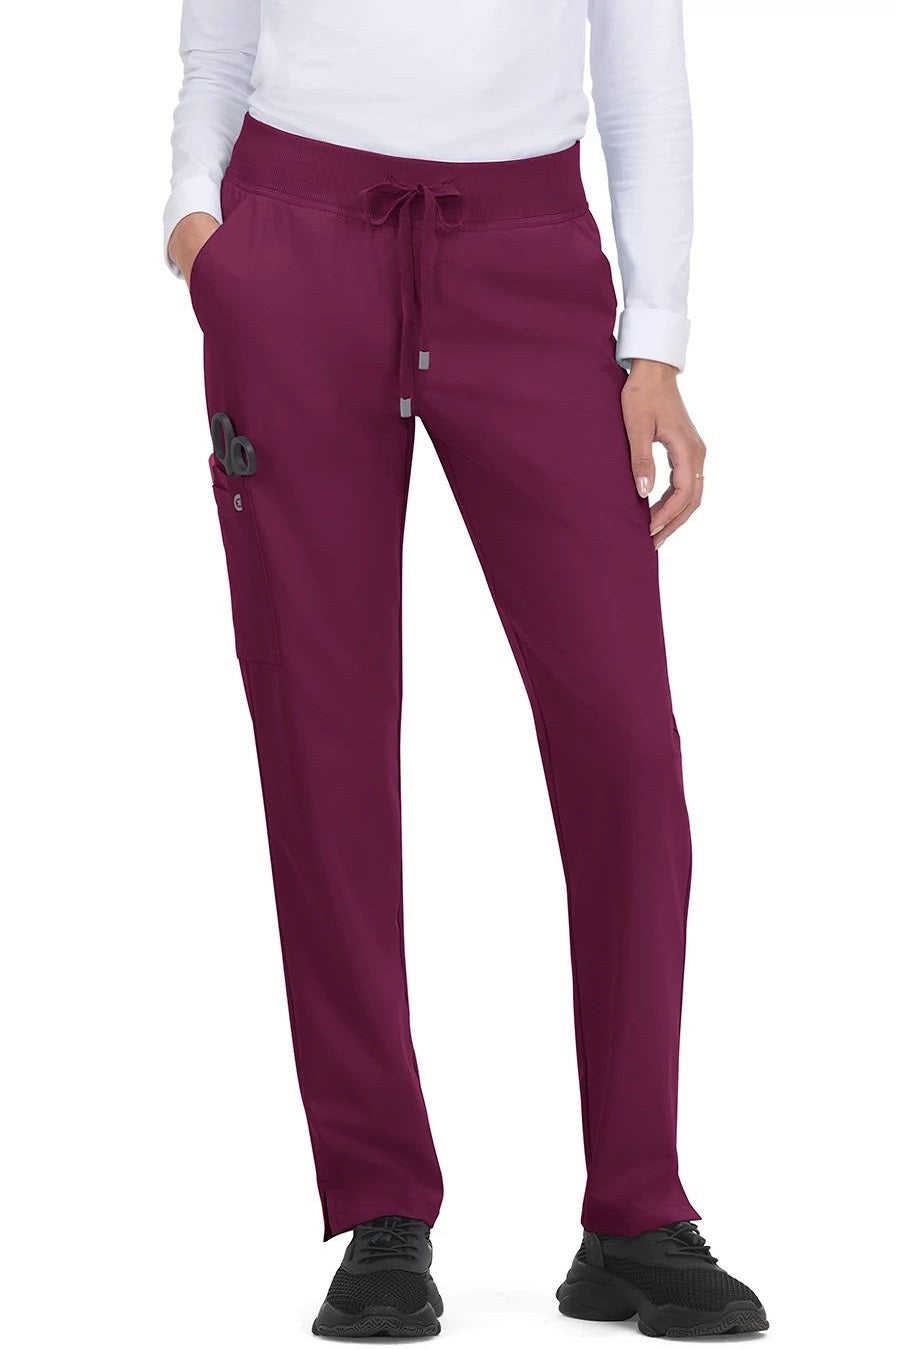 koi Scrub Pants Cureology Atria in Tall Wine at Parker's Clothing and Shoes.